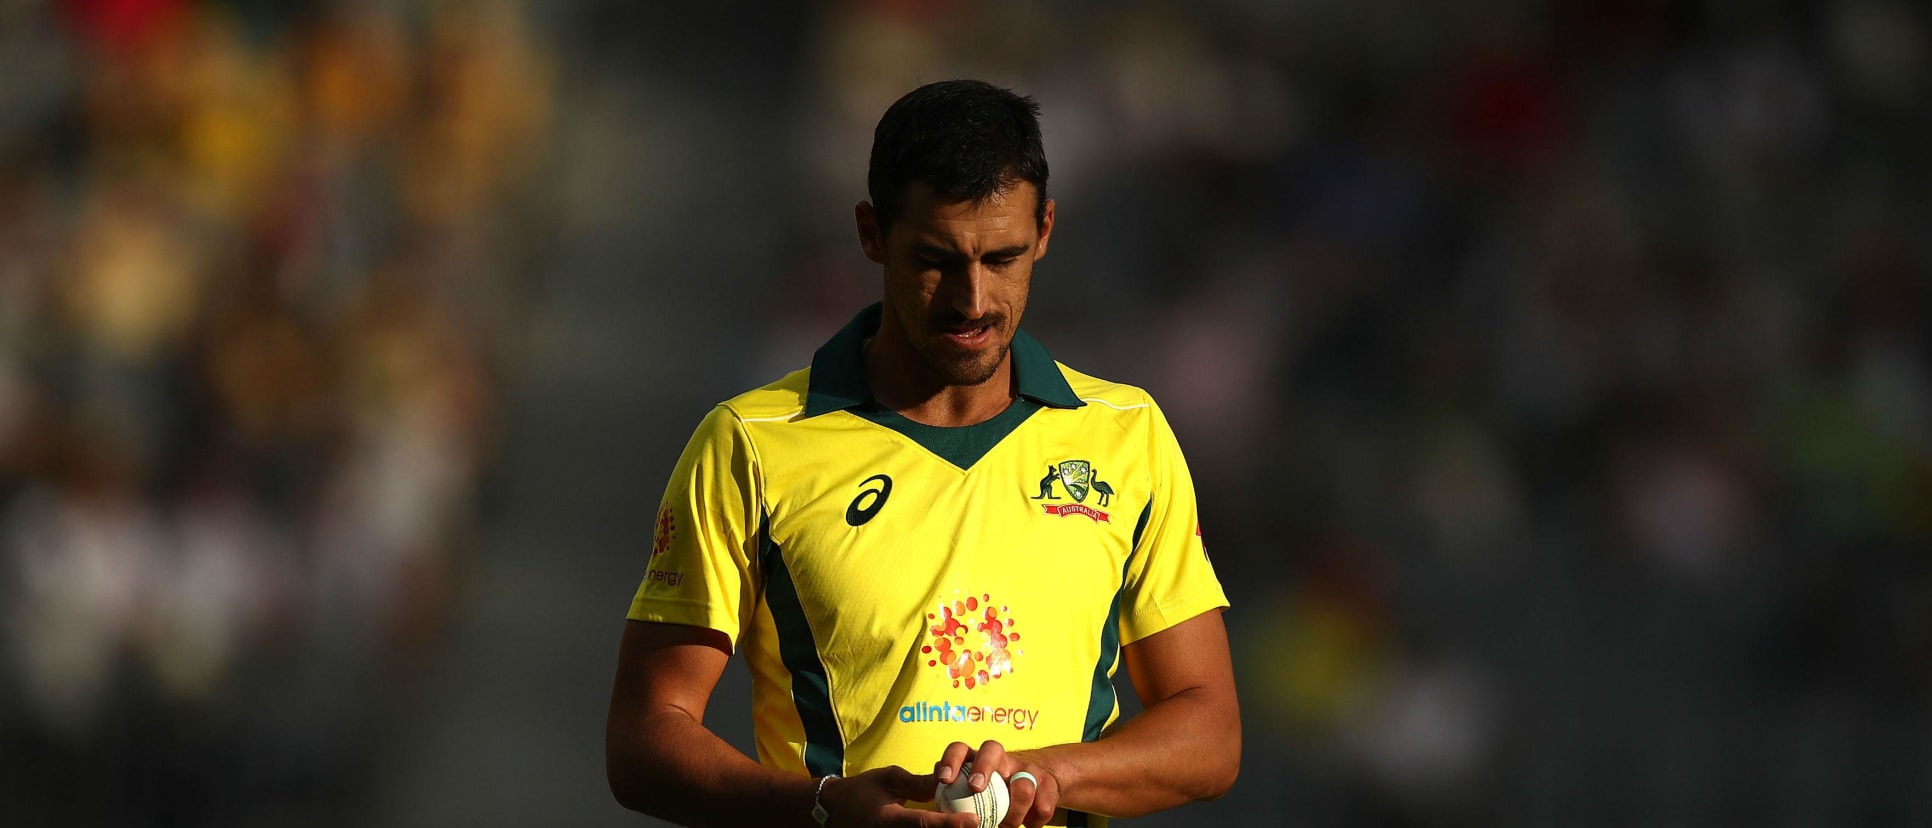 Mitchell Starc has been called up as Billy Stanlake's replacement